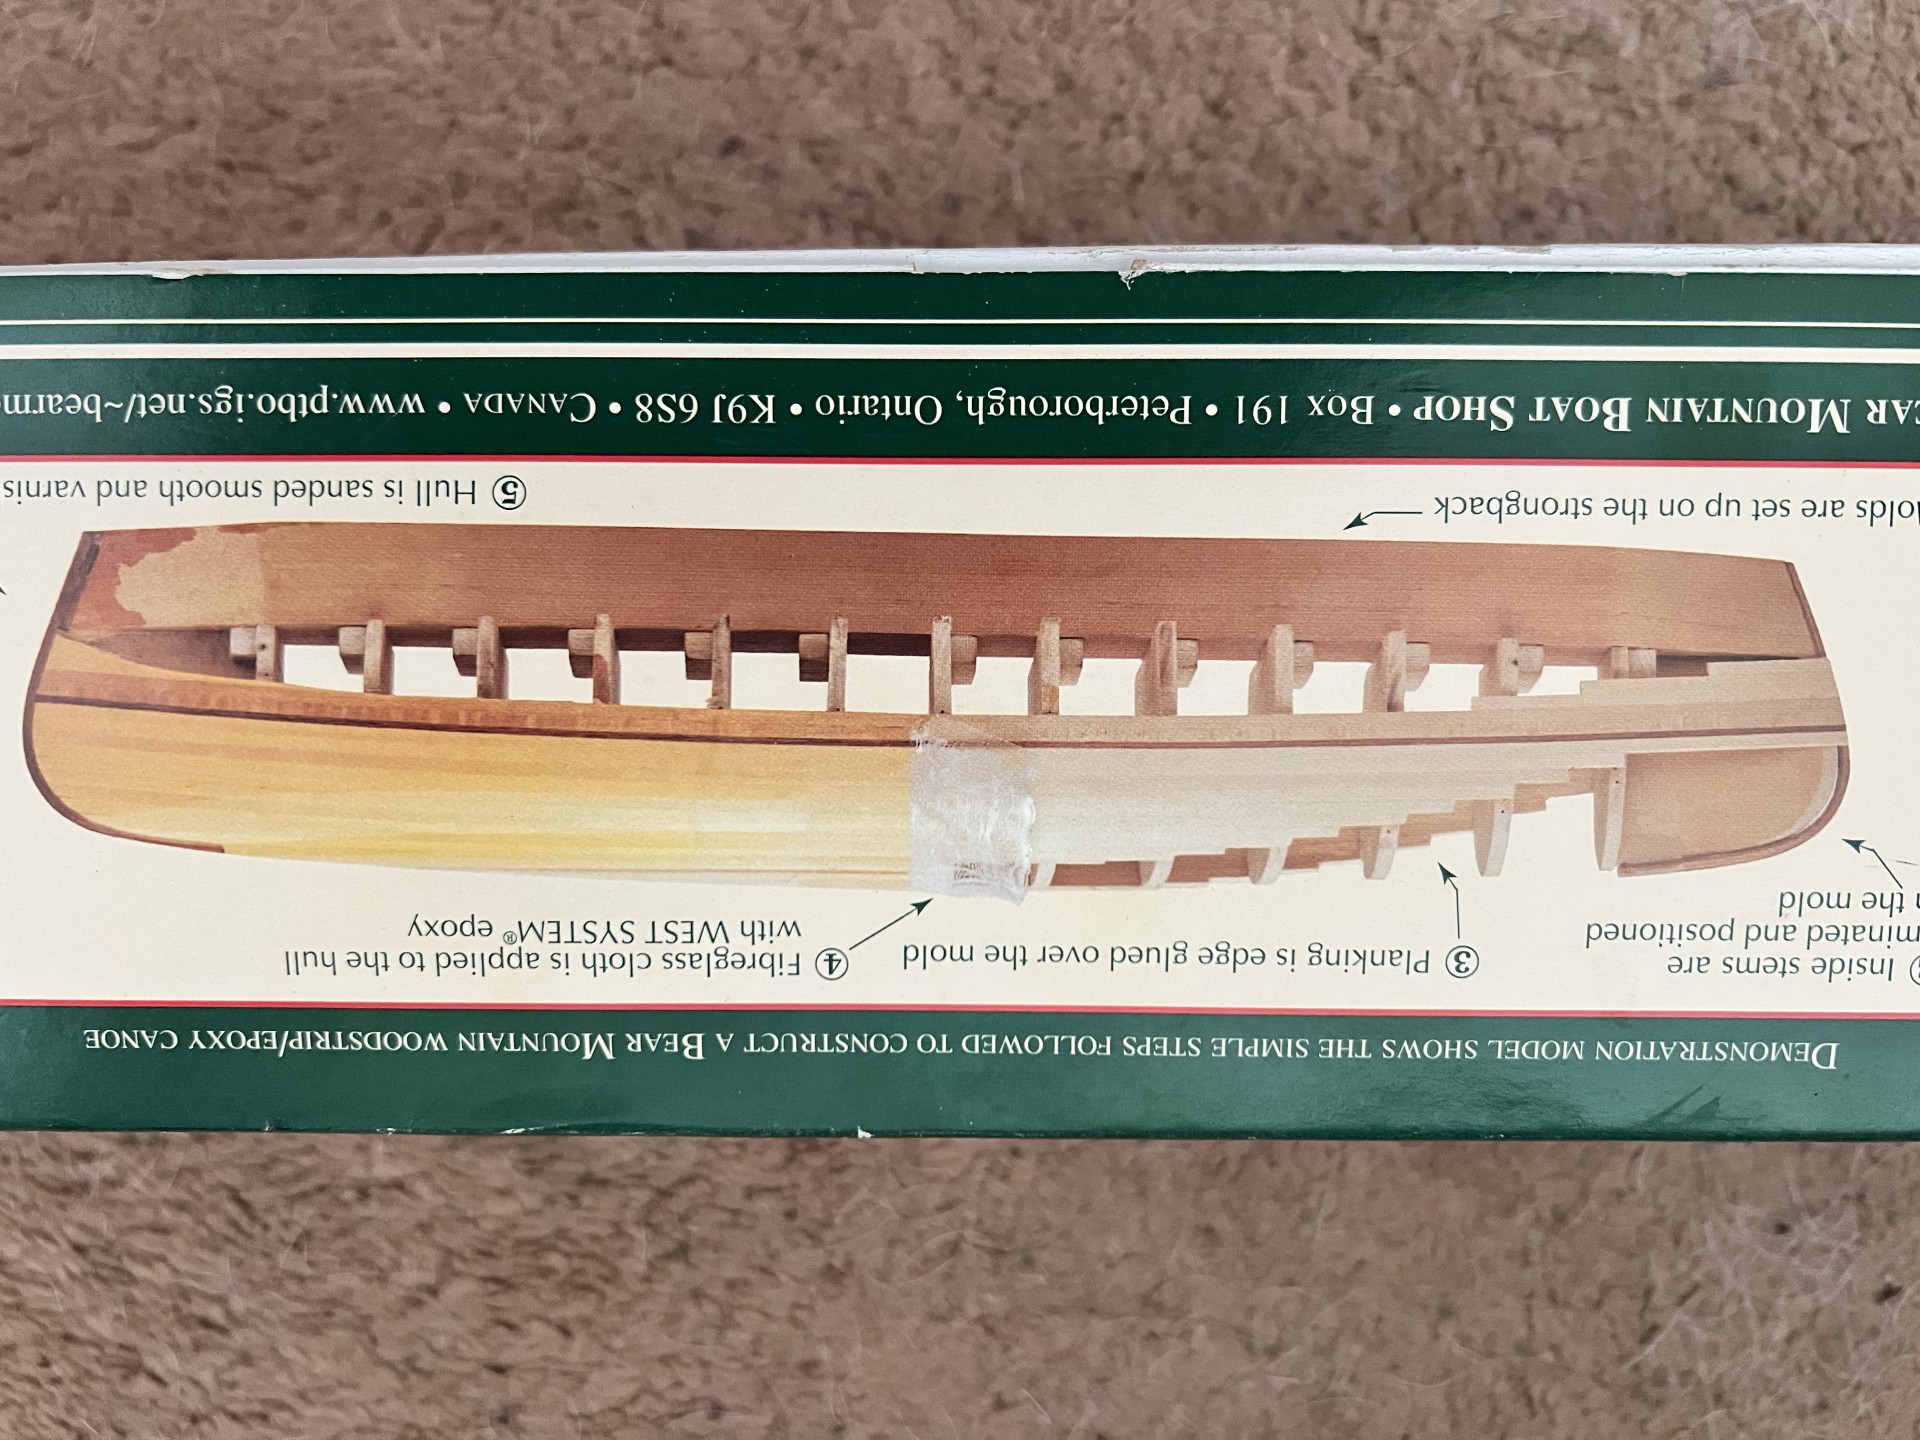 Everything is included in this wooden canoe model kit.